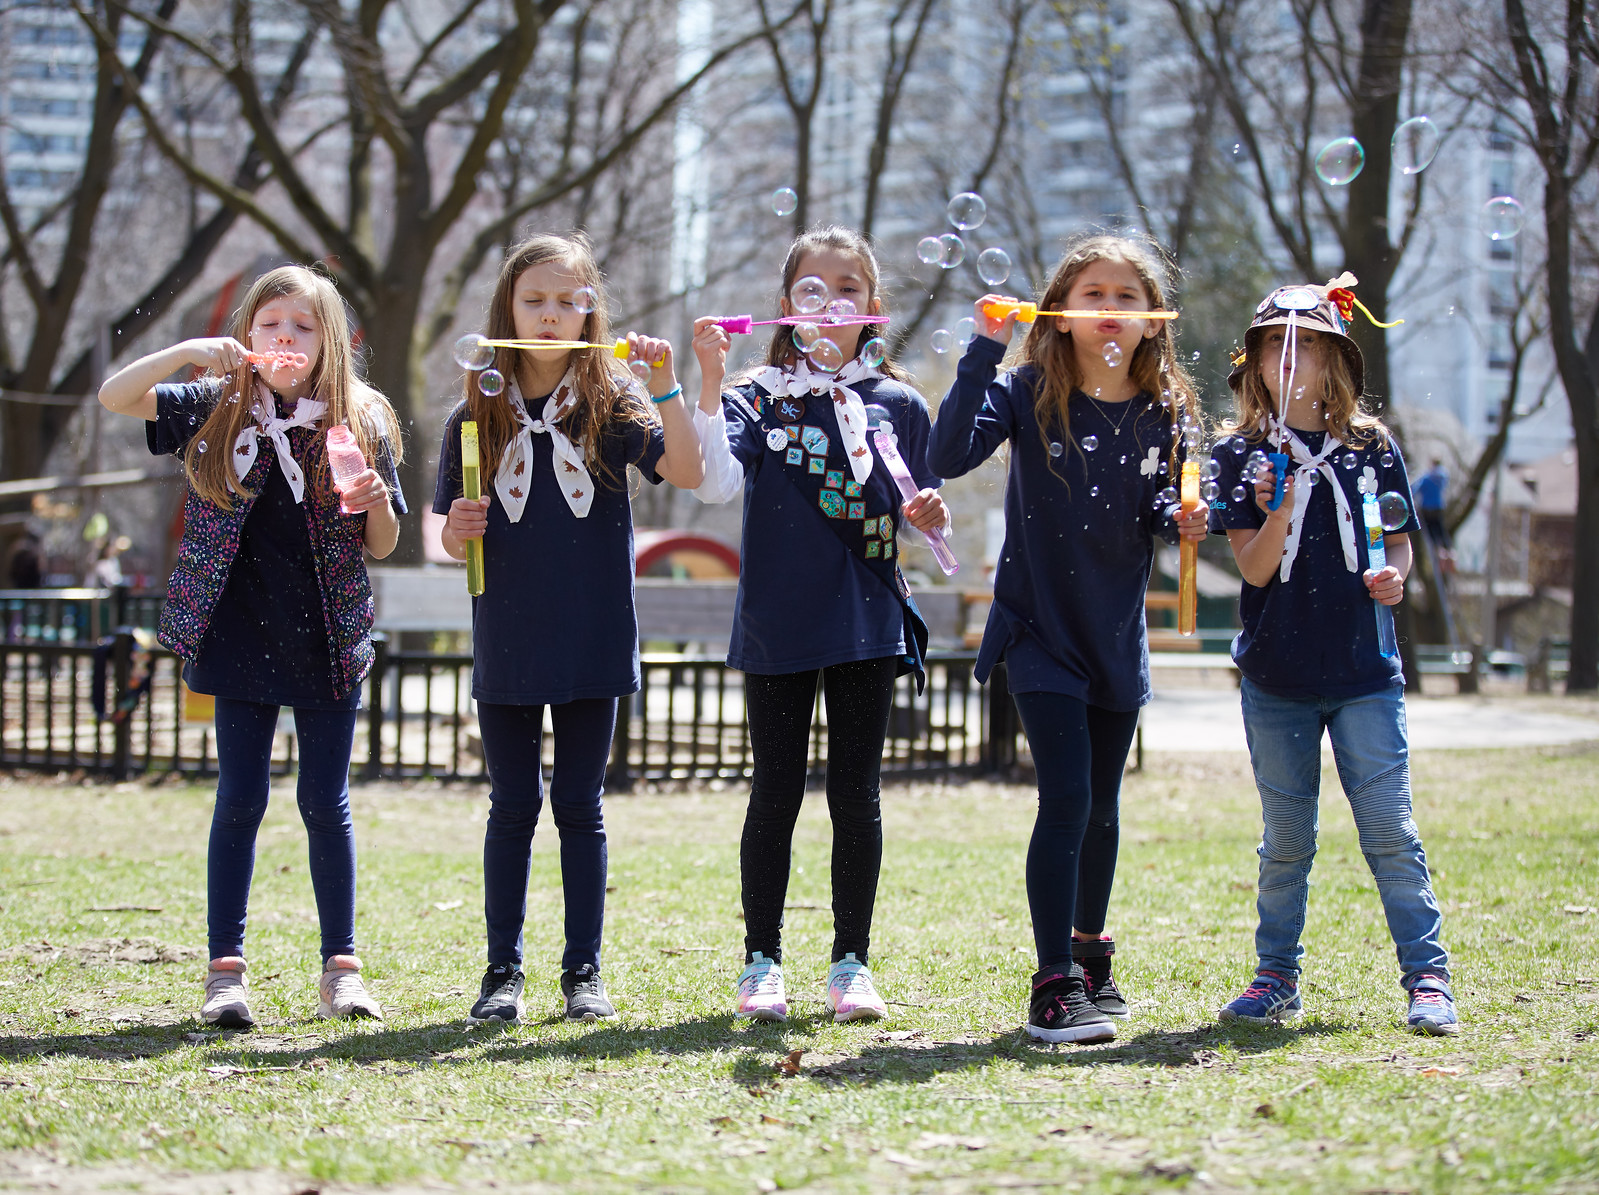 Five Girl Guides aged 7 to 8 blowing bubbles outdoors at a park